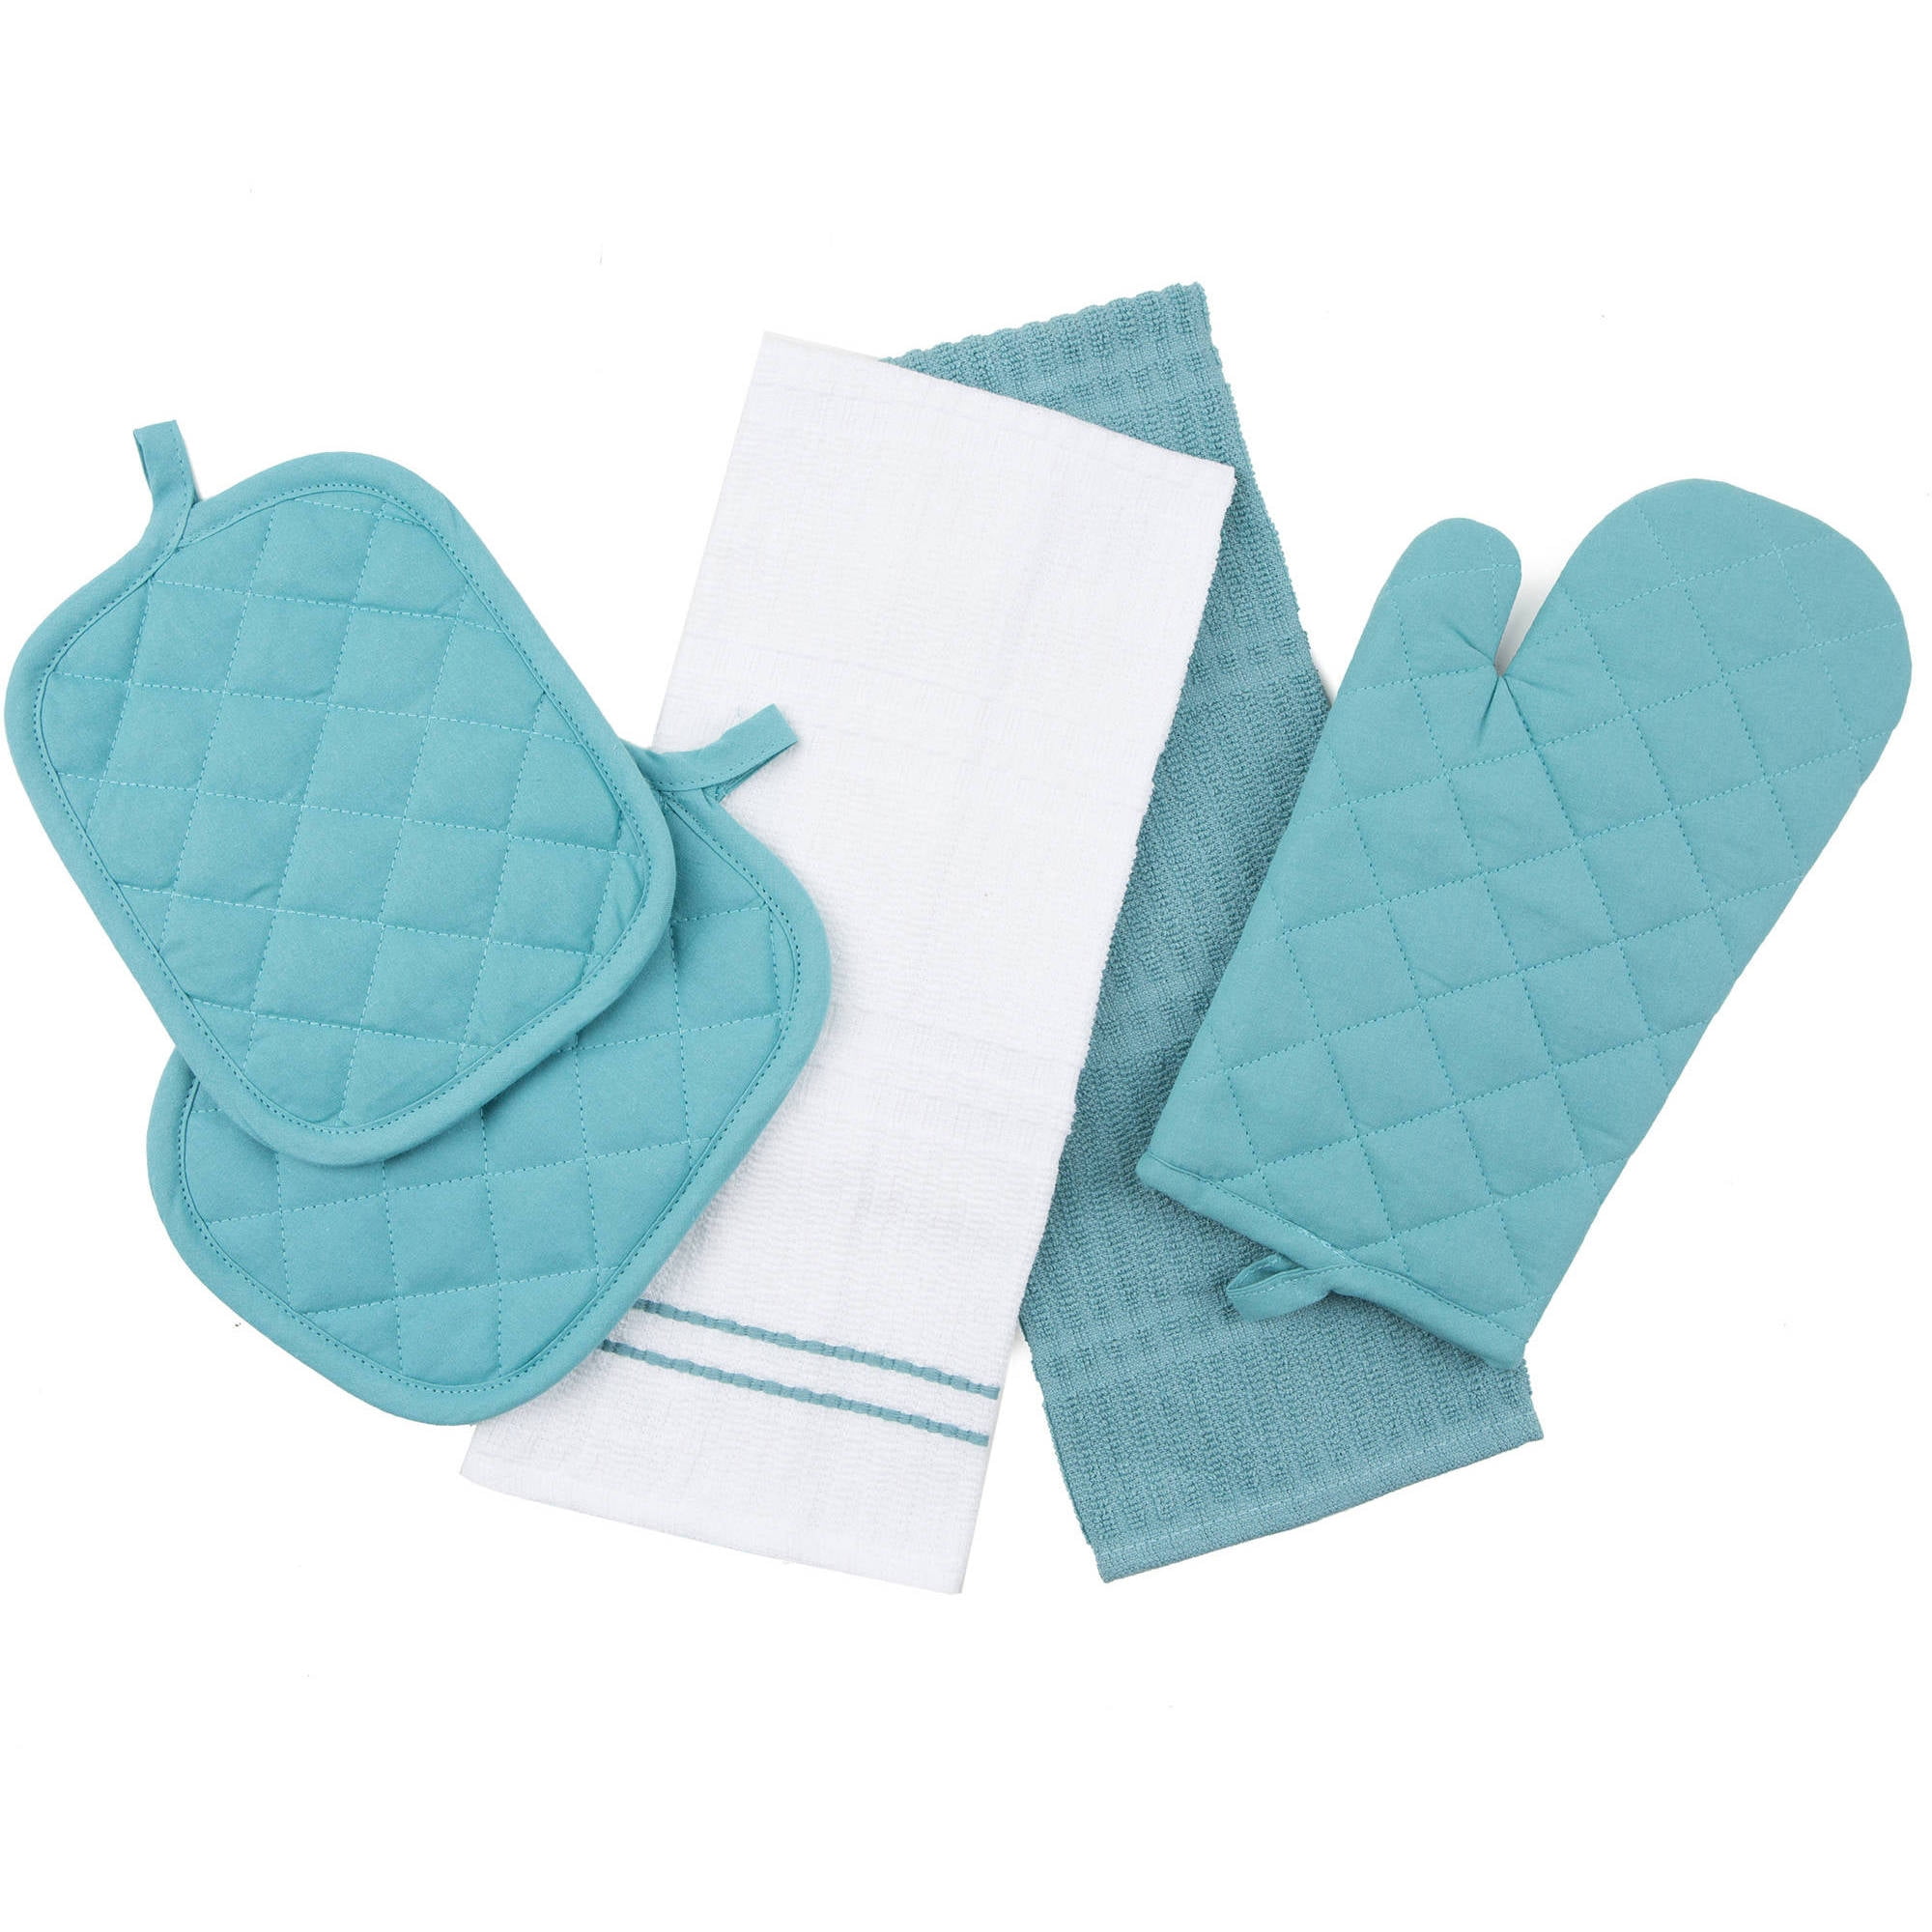 Details about  / New Home Collection Coffee Time Kitchen Oven Mitt Glove 7 x 13 Turquoise w Tag